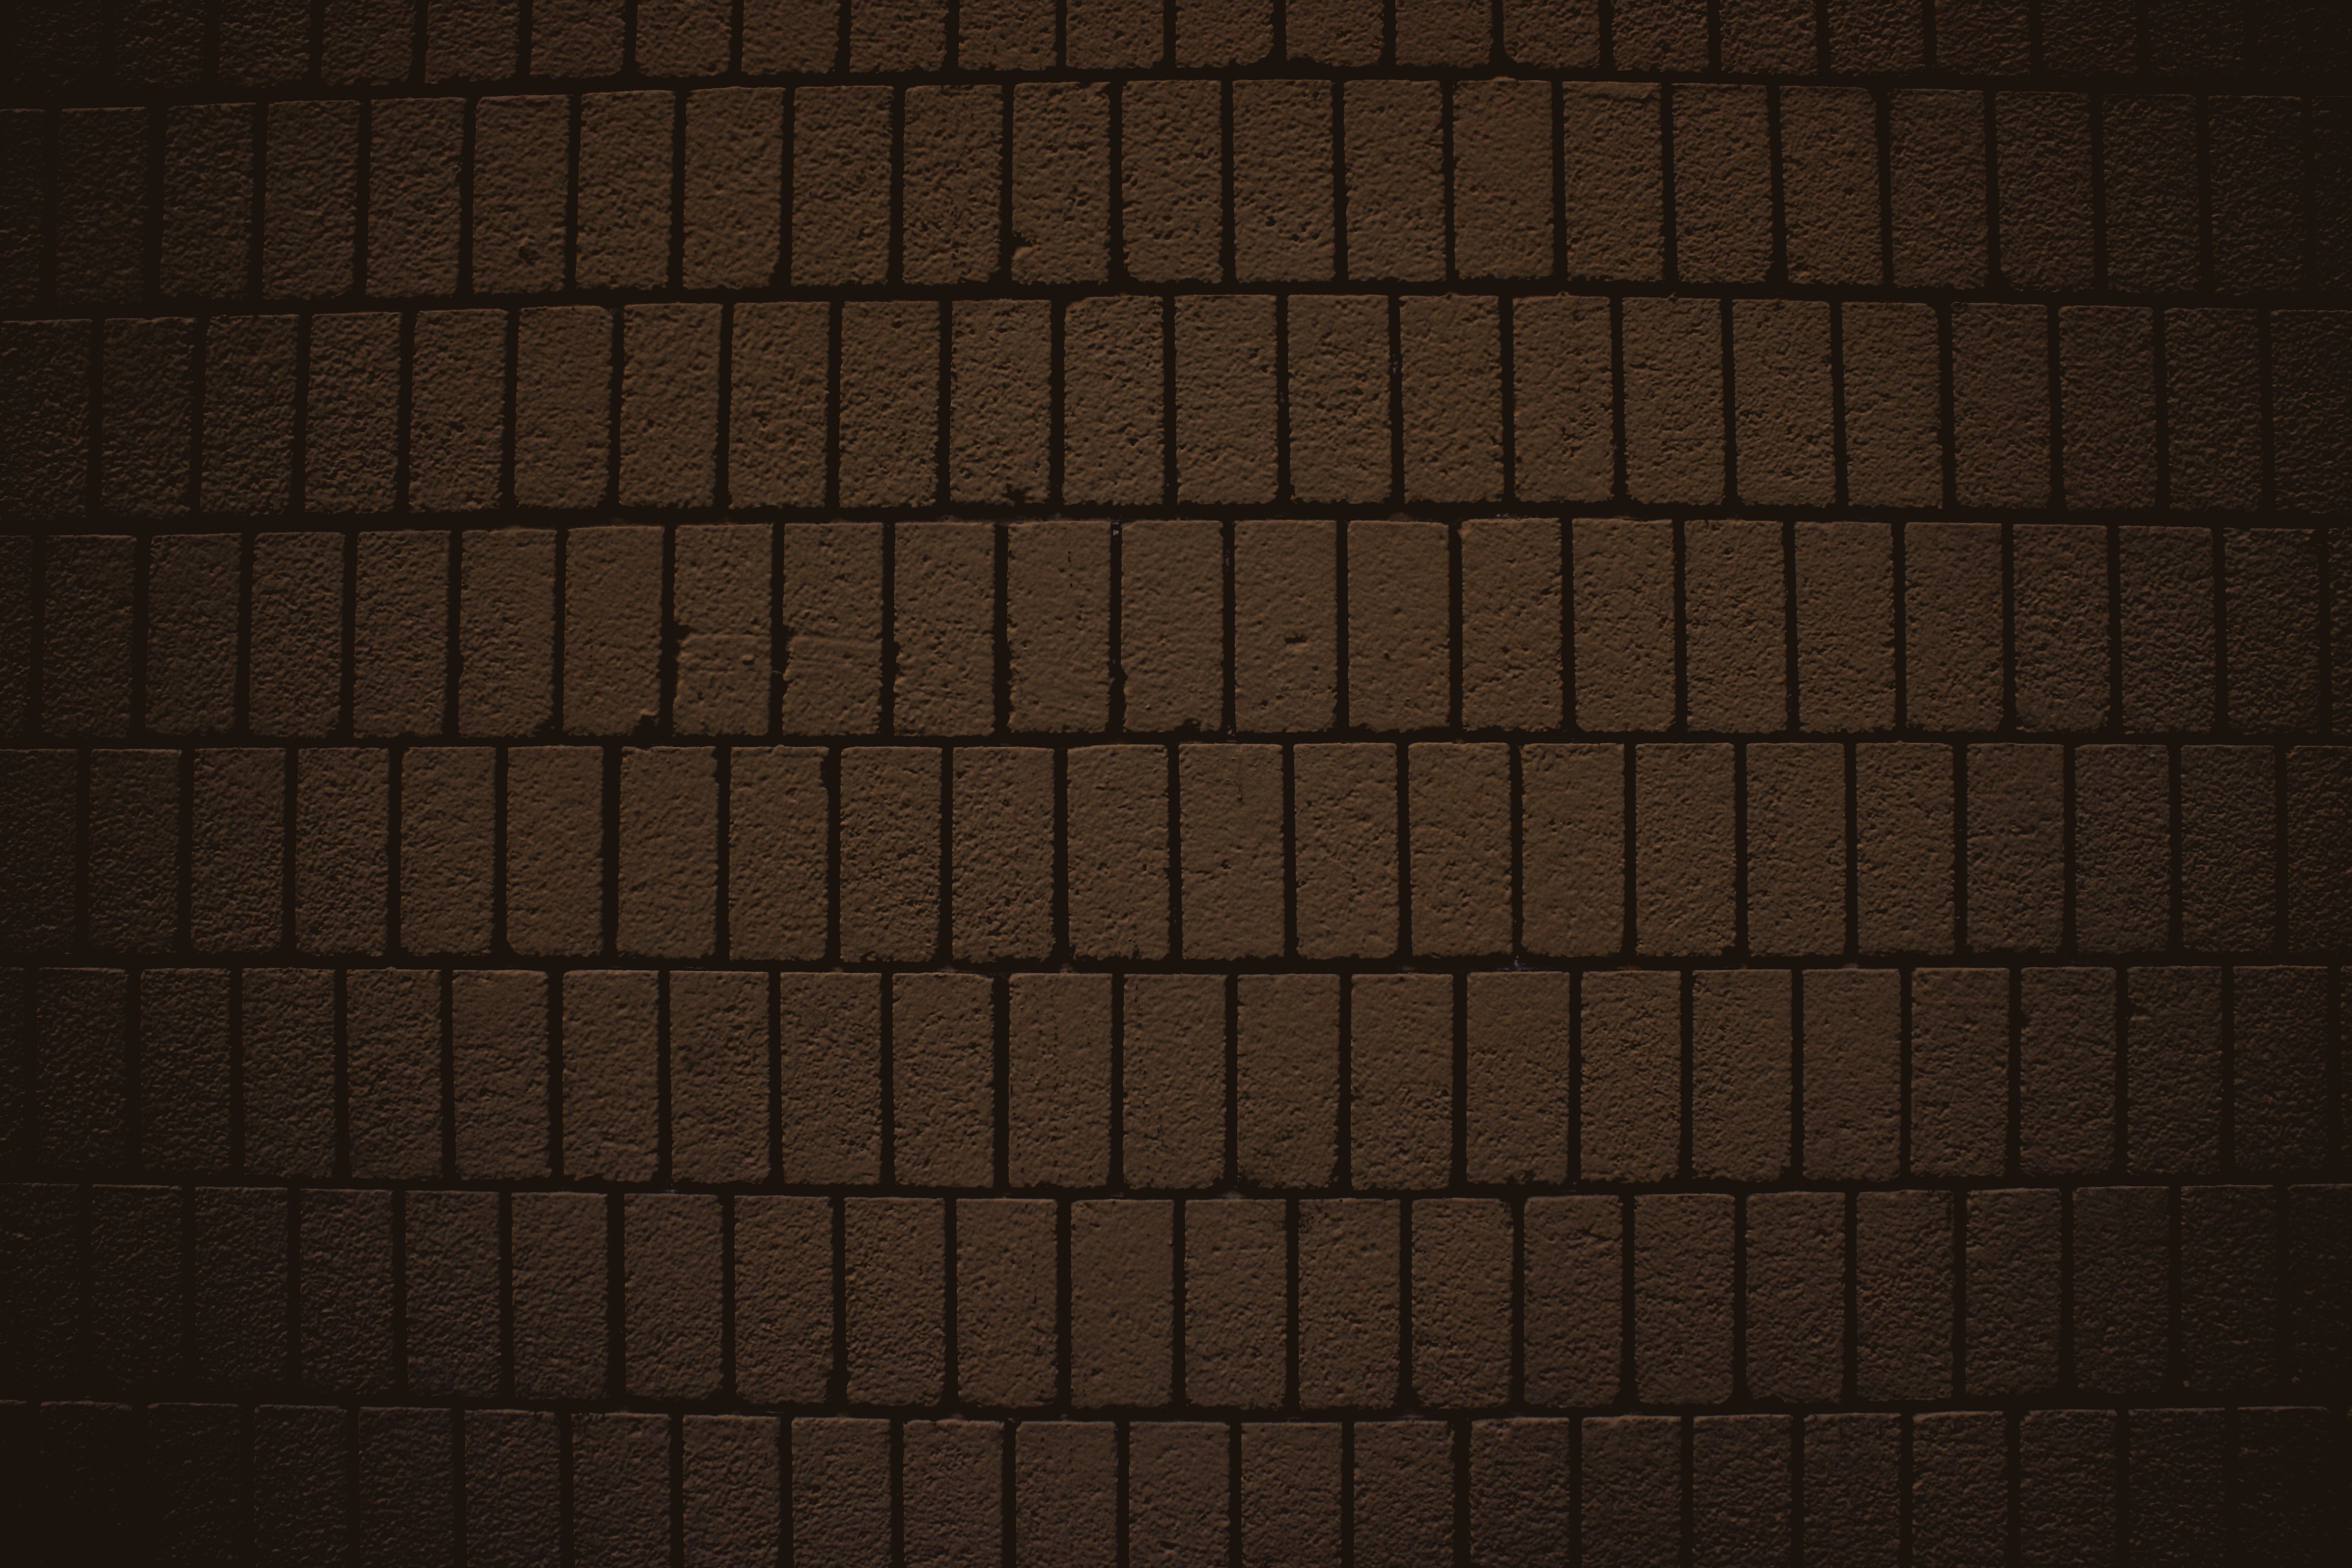 Chocolate Brown Brick Wall Texture With Vertical Bricks Picture